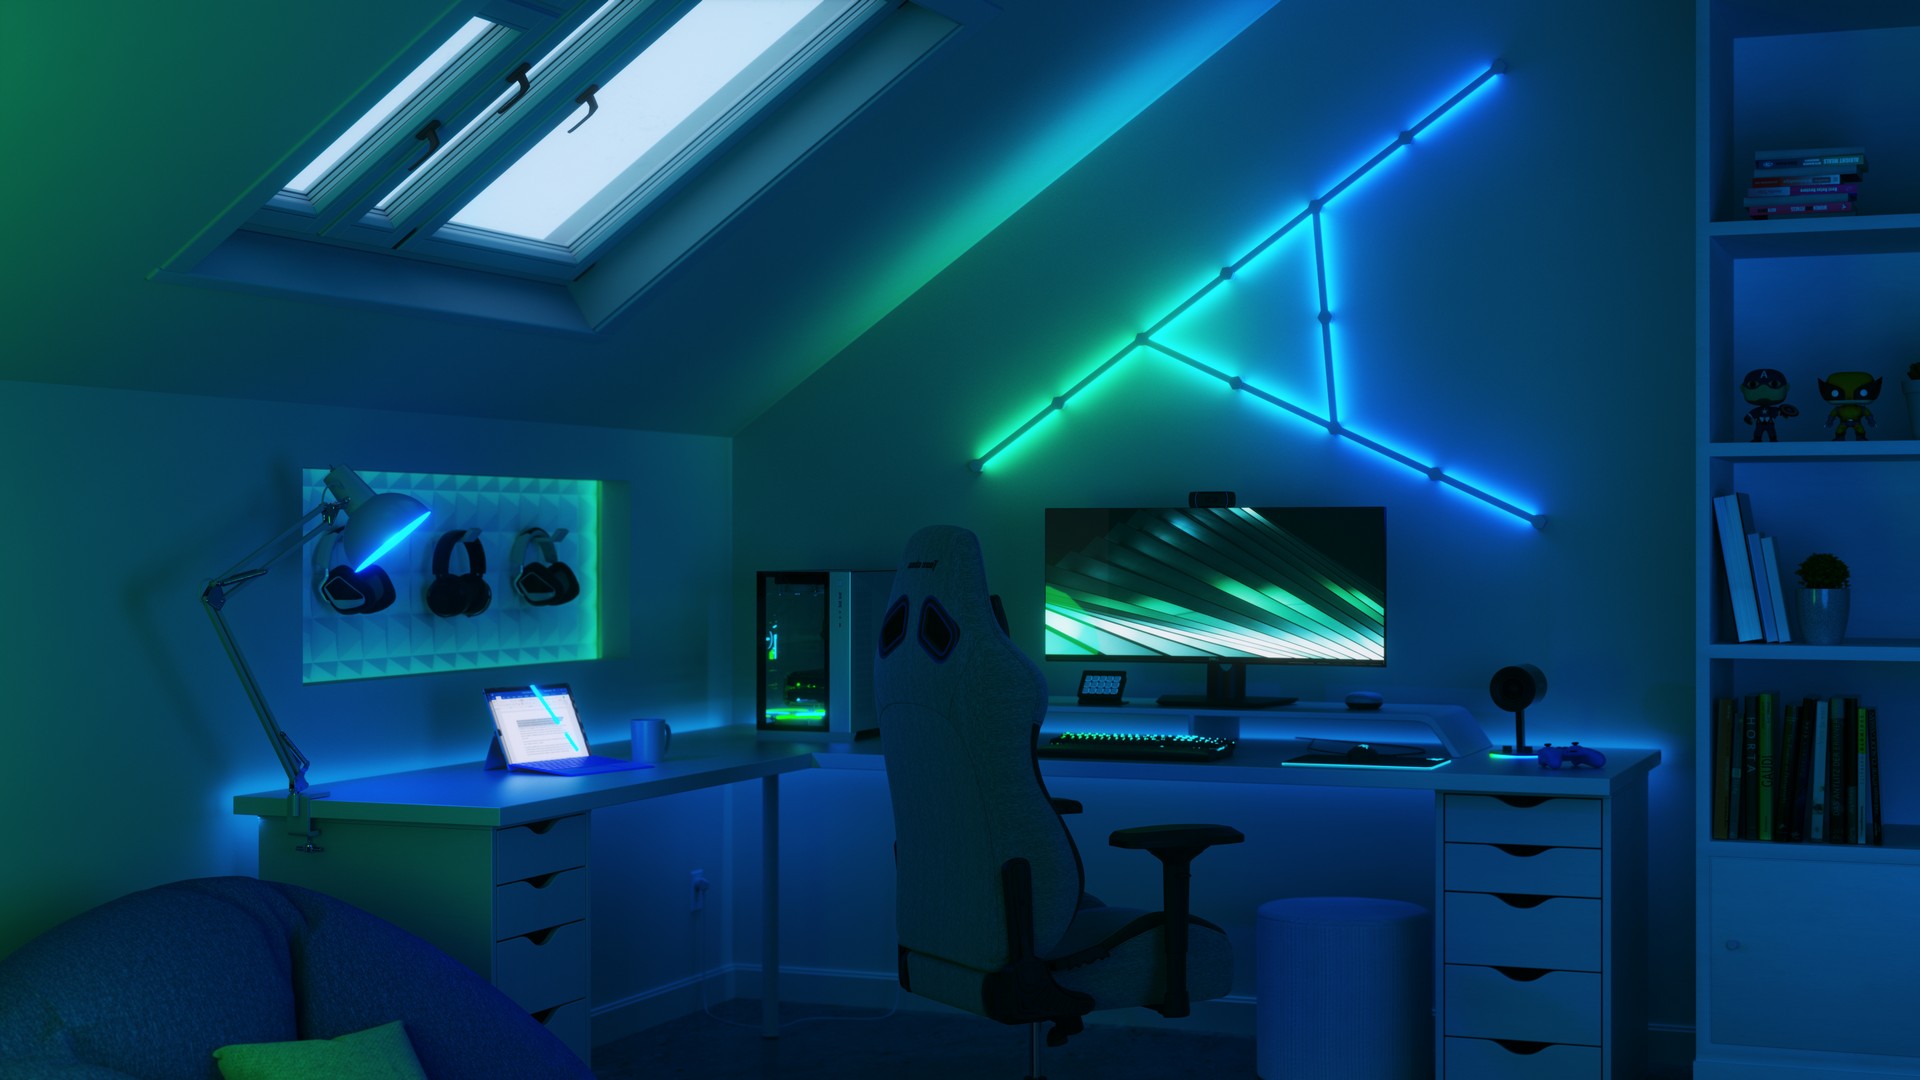 Nanoleaf Changes The Game For Battlestations With The Launch Of “Lines,” The First-Ever Backlit Modular LED Light Bars